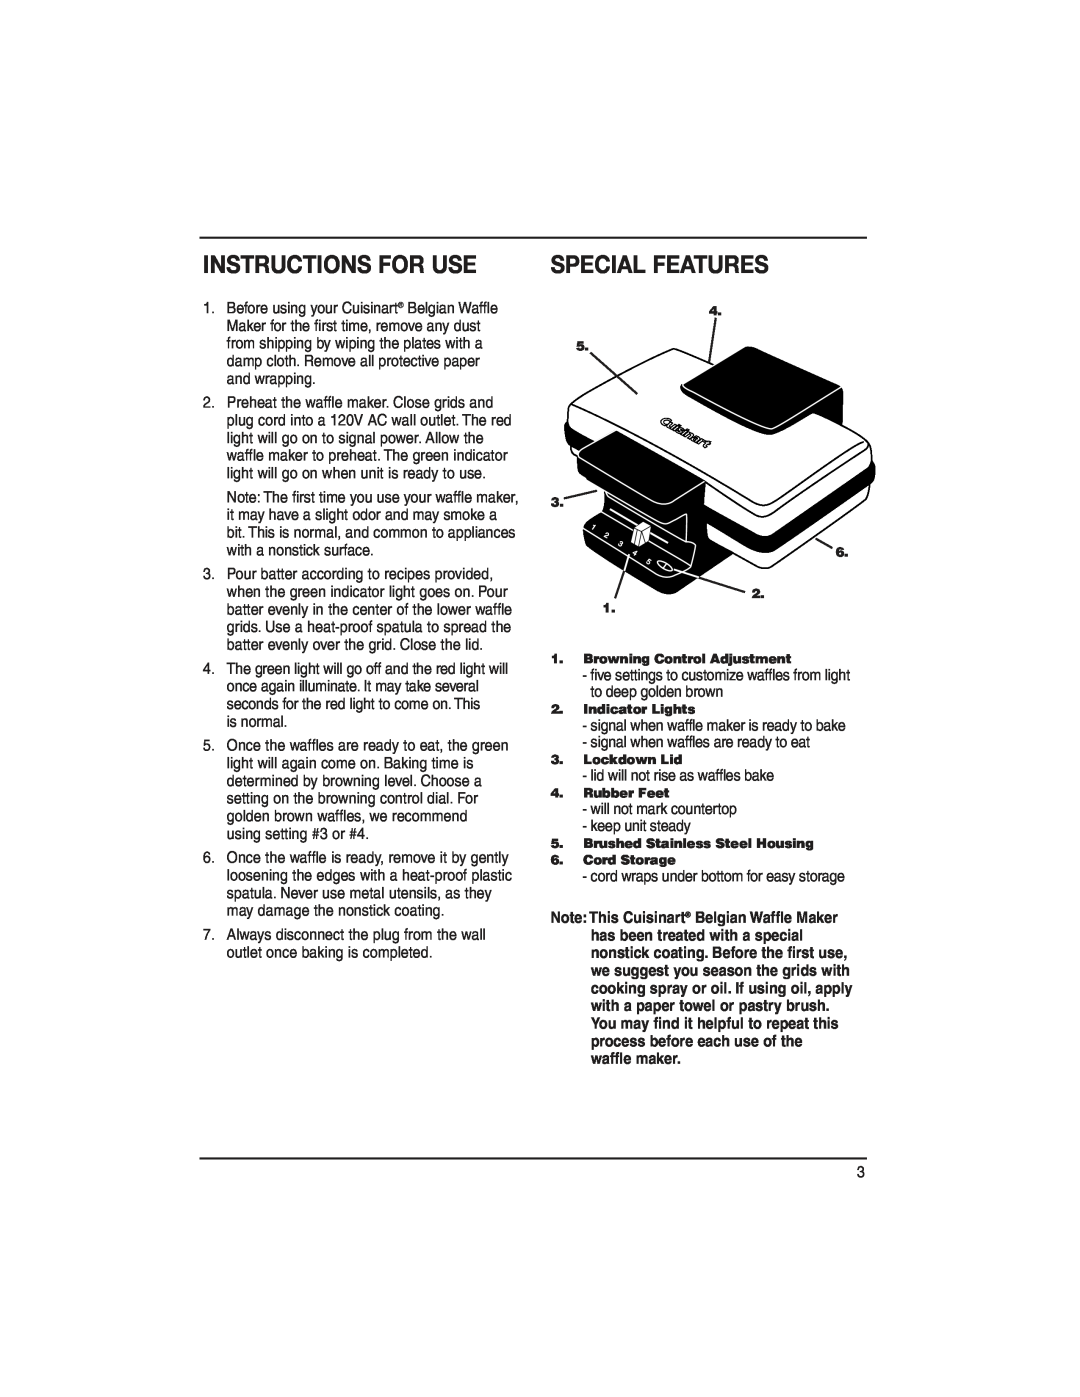 Cuisinart WMB-2A manual Instructions For Use, Special Features 